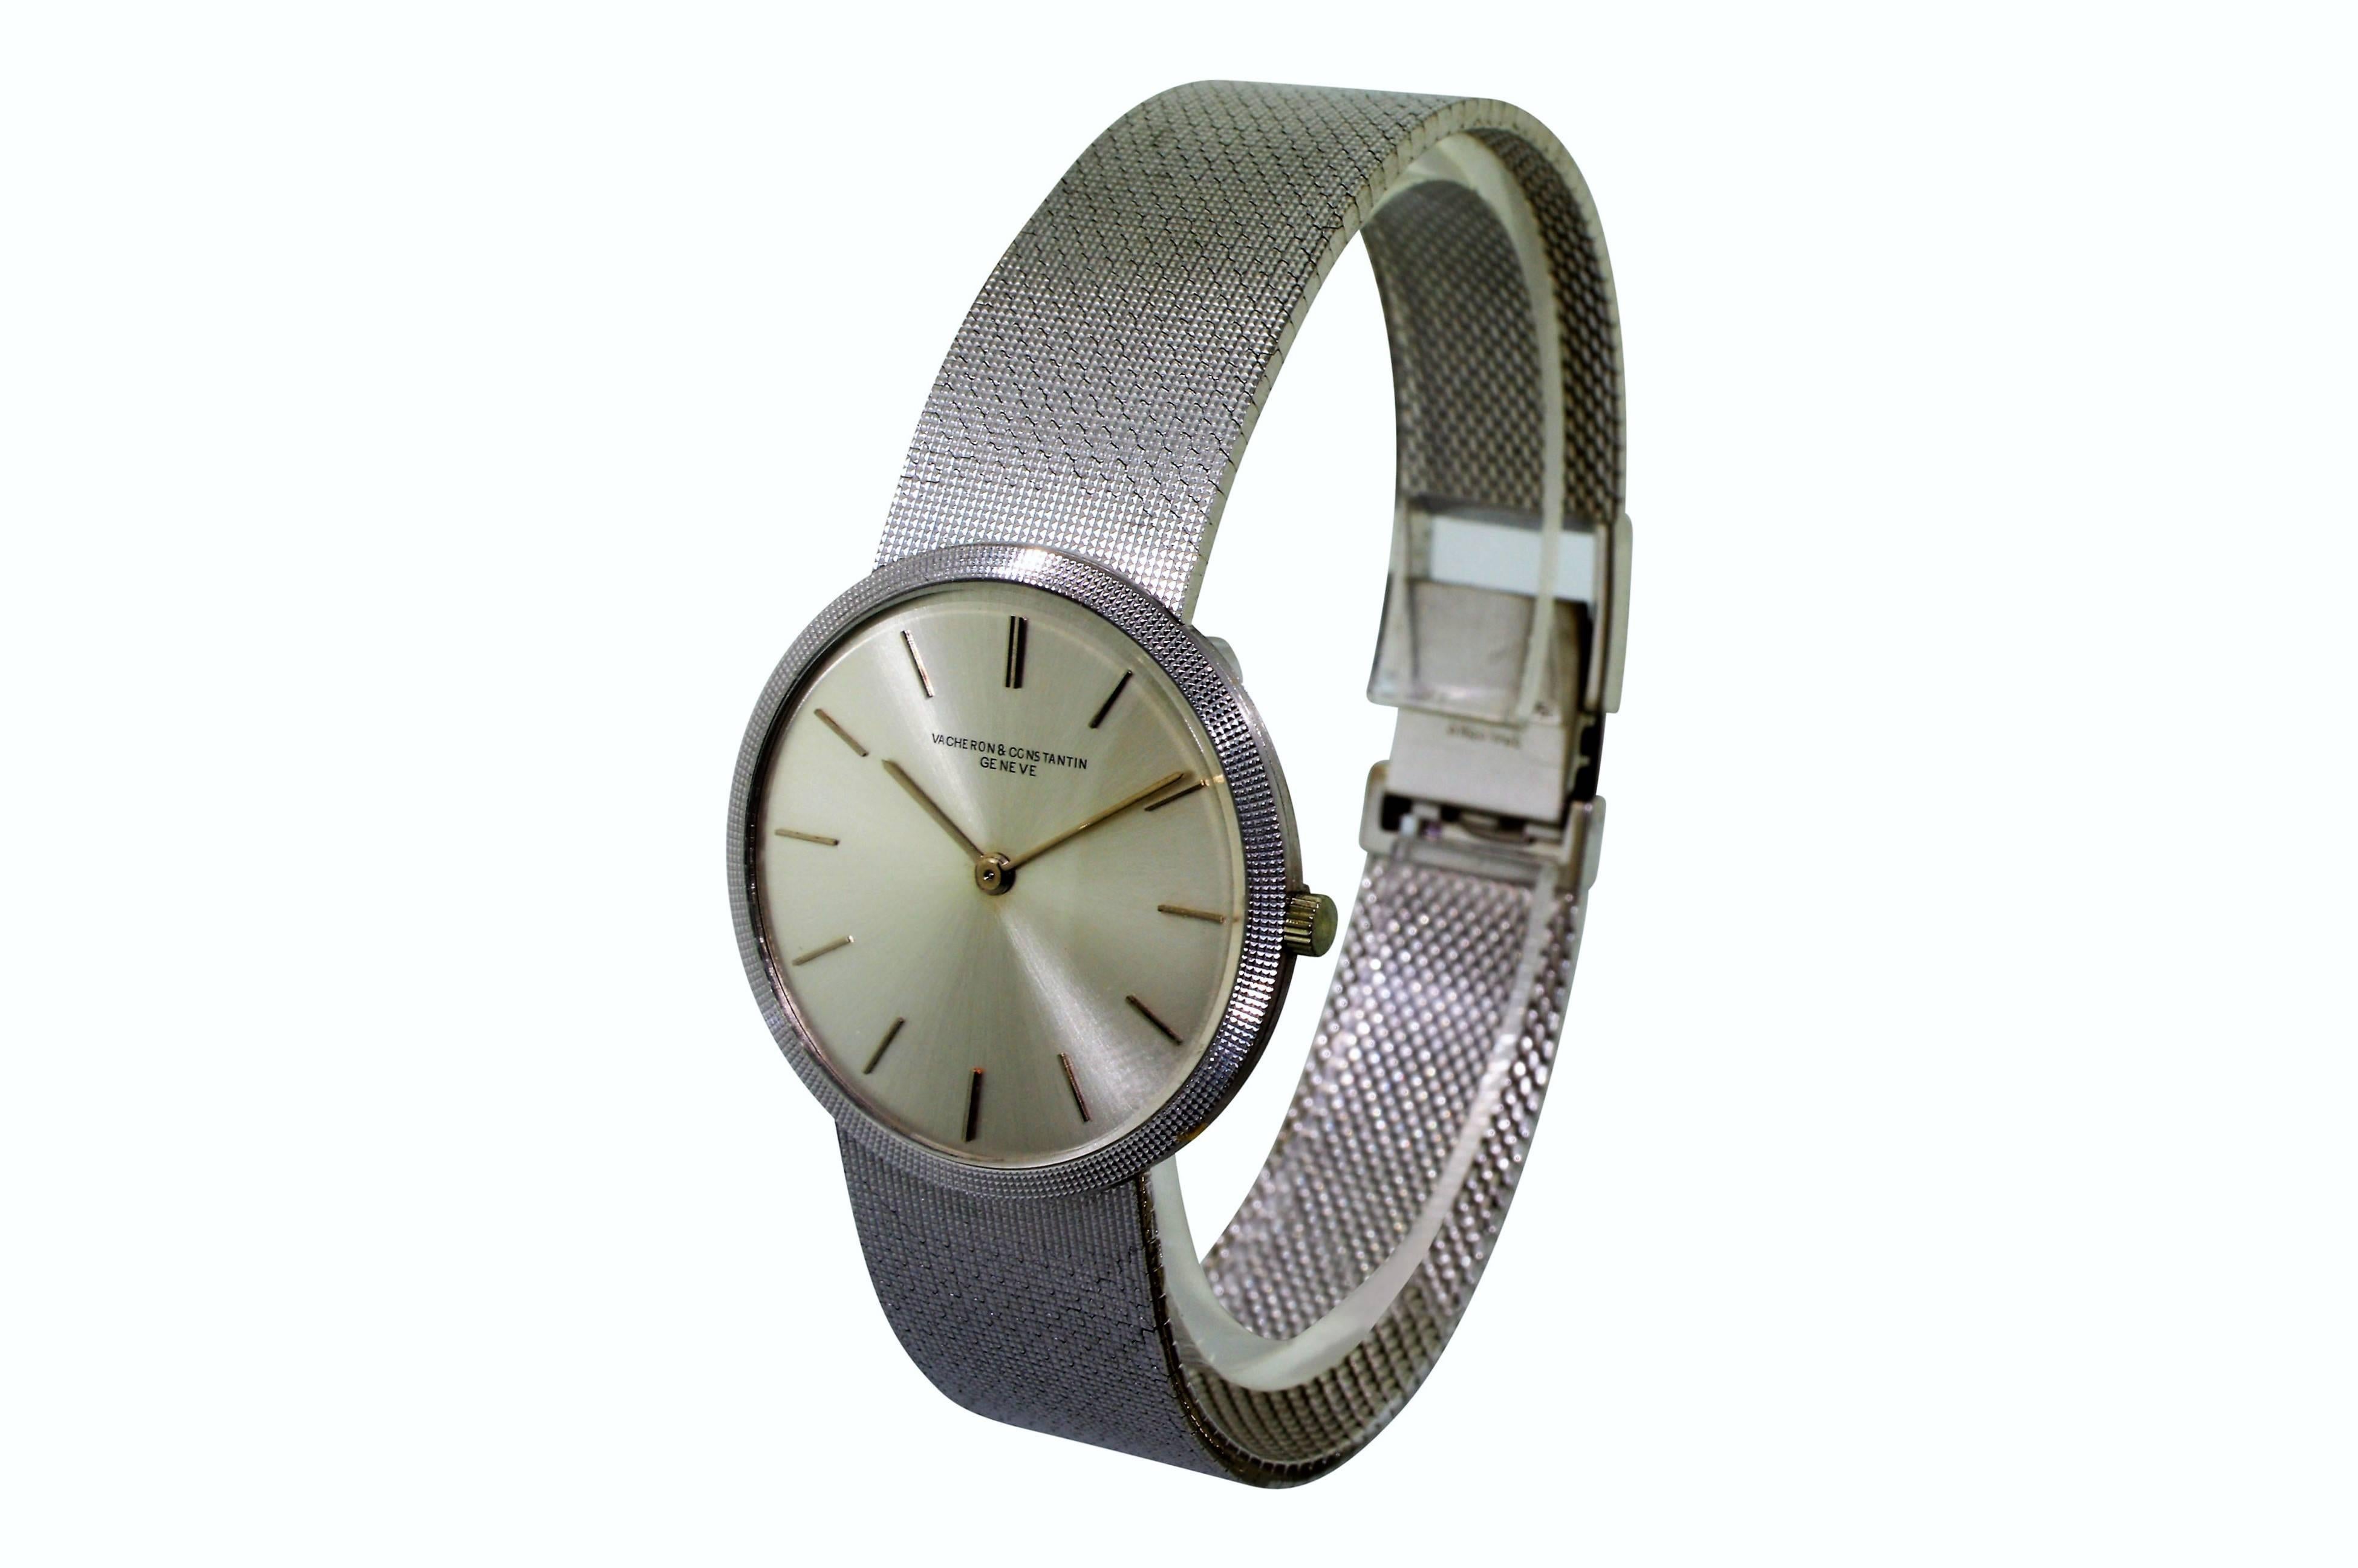 Vacheron & Constantin White Gold Dress Bracelet Watch In Excellent Condition For Sale In Long Beach, CA